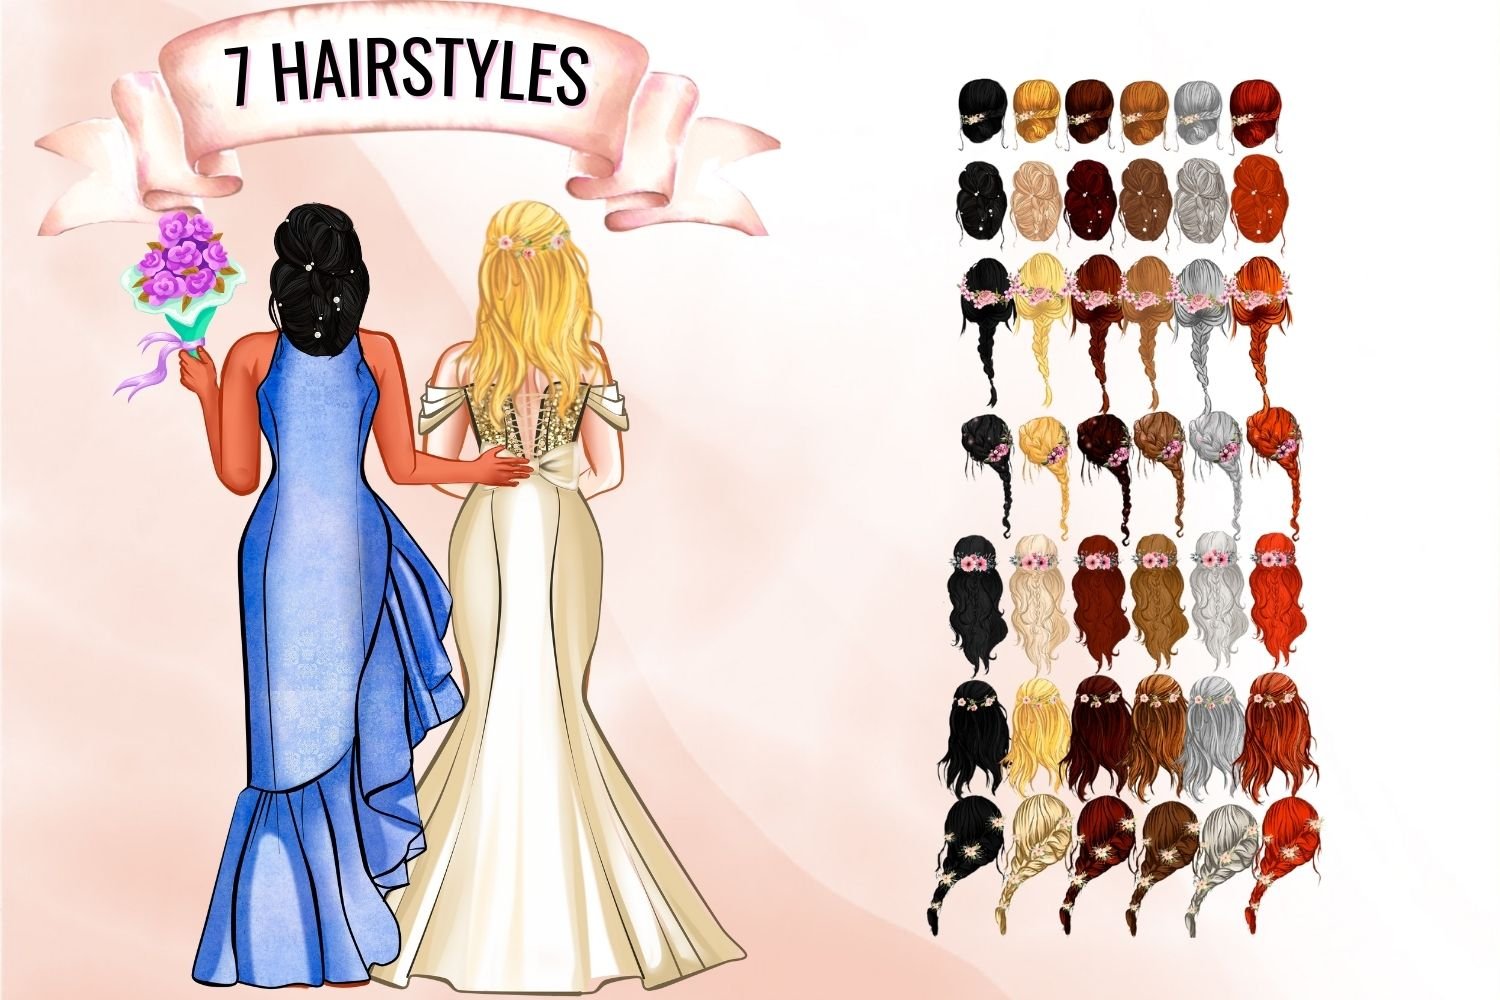 Hairstyles collection.